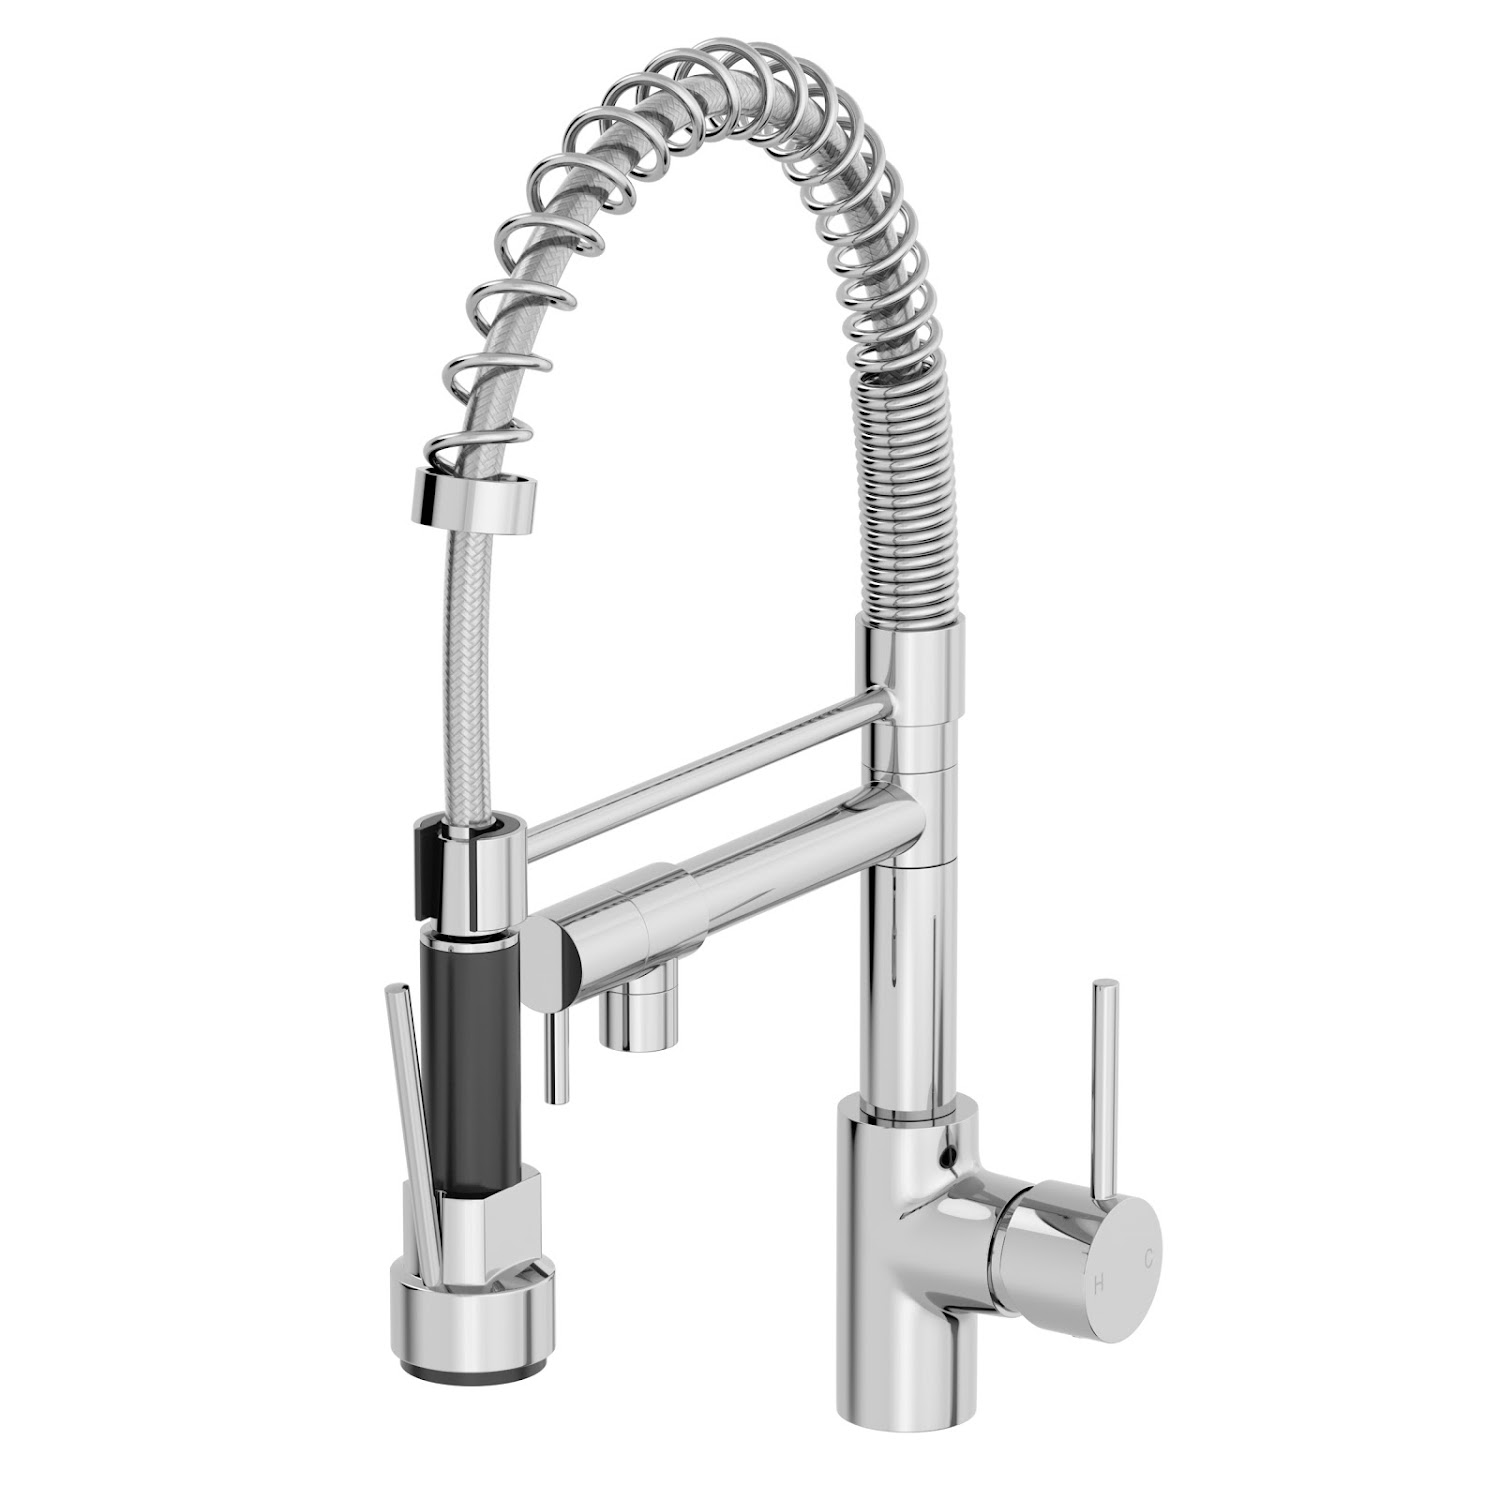 Sauber Dual Spout Kitchen Mixer Tap With Pull Out Spray Chrome 